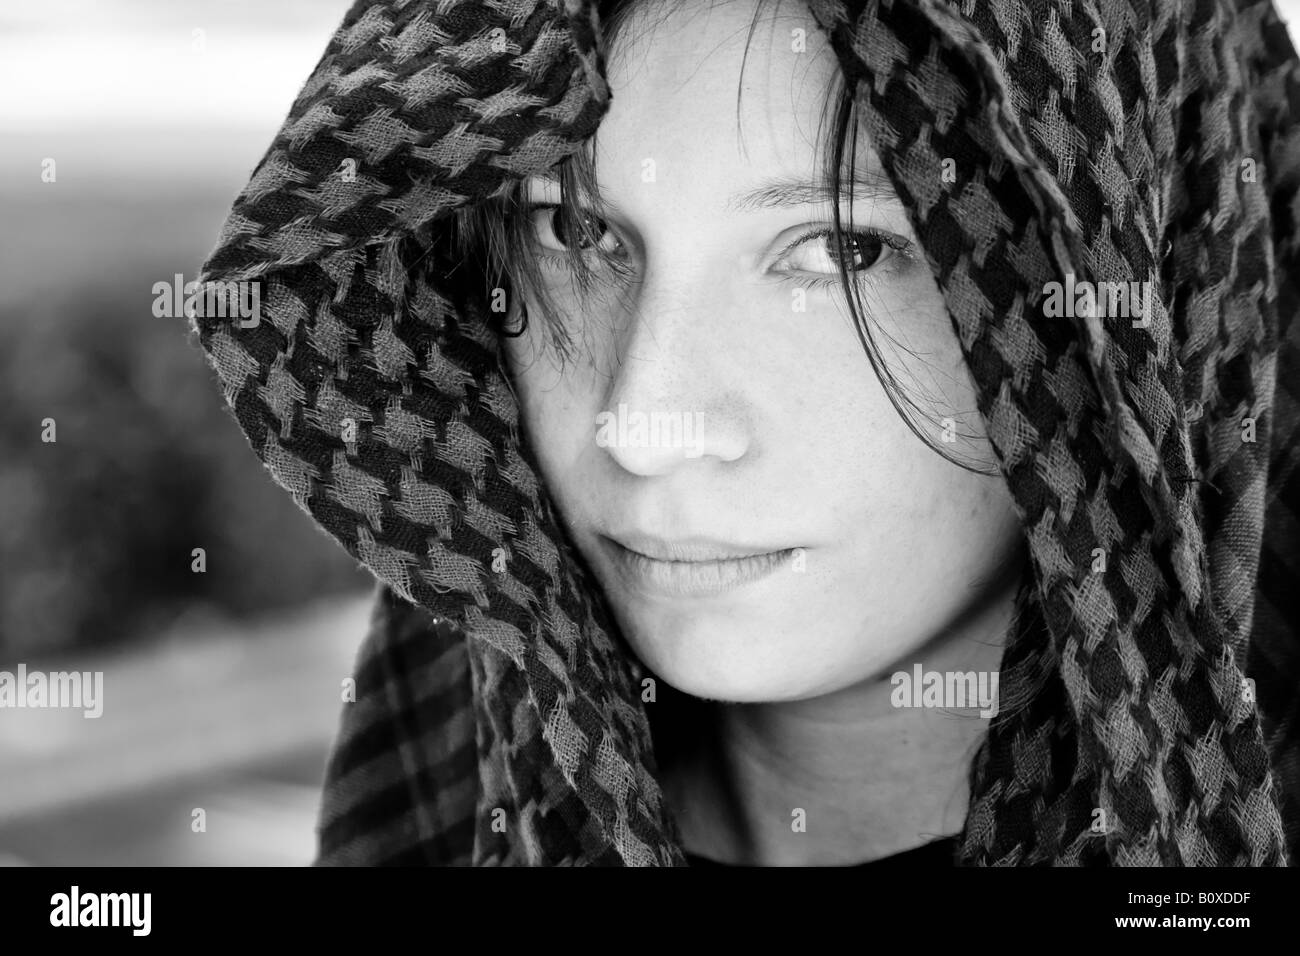 Staring woman portrait covered by veil Stock Photo